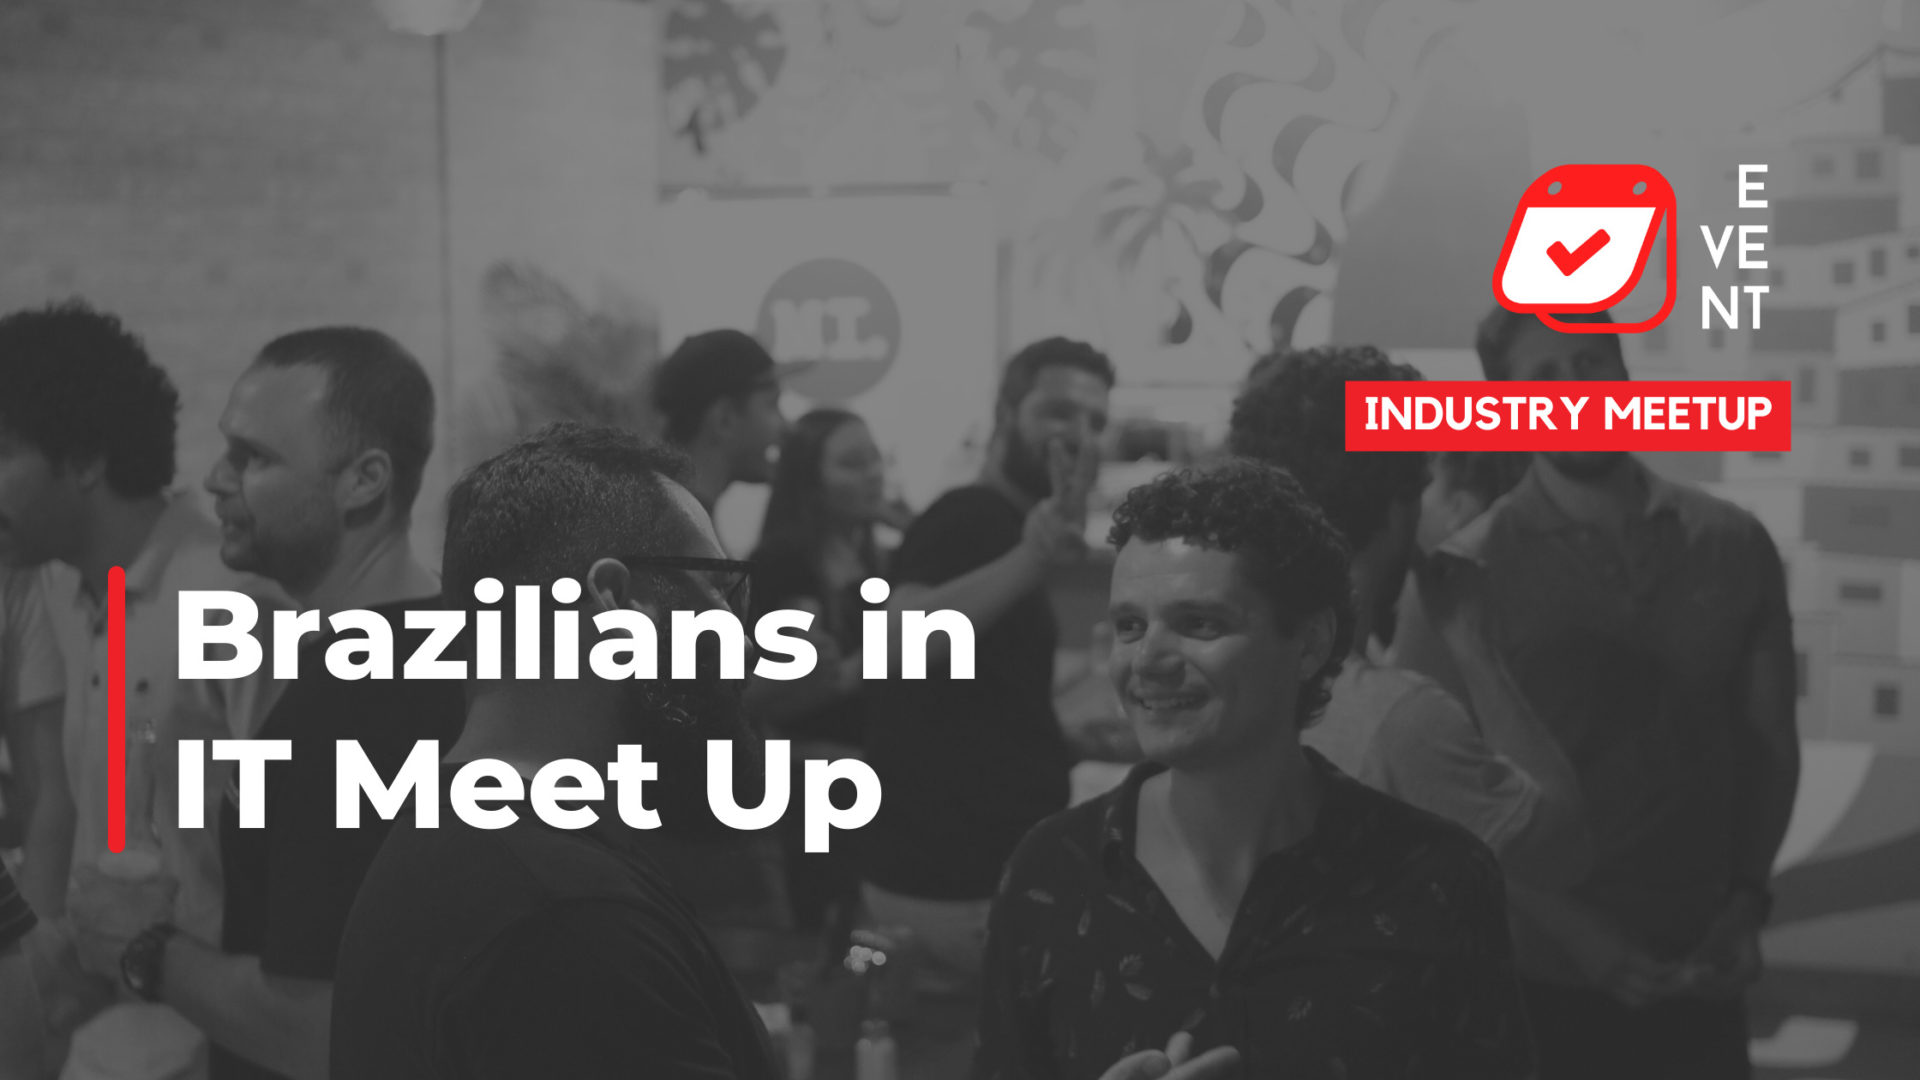 Record Attendance at our Brazilians in IT Meet Up